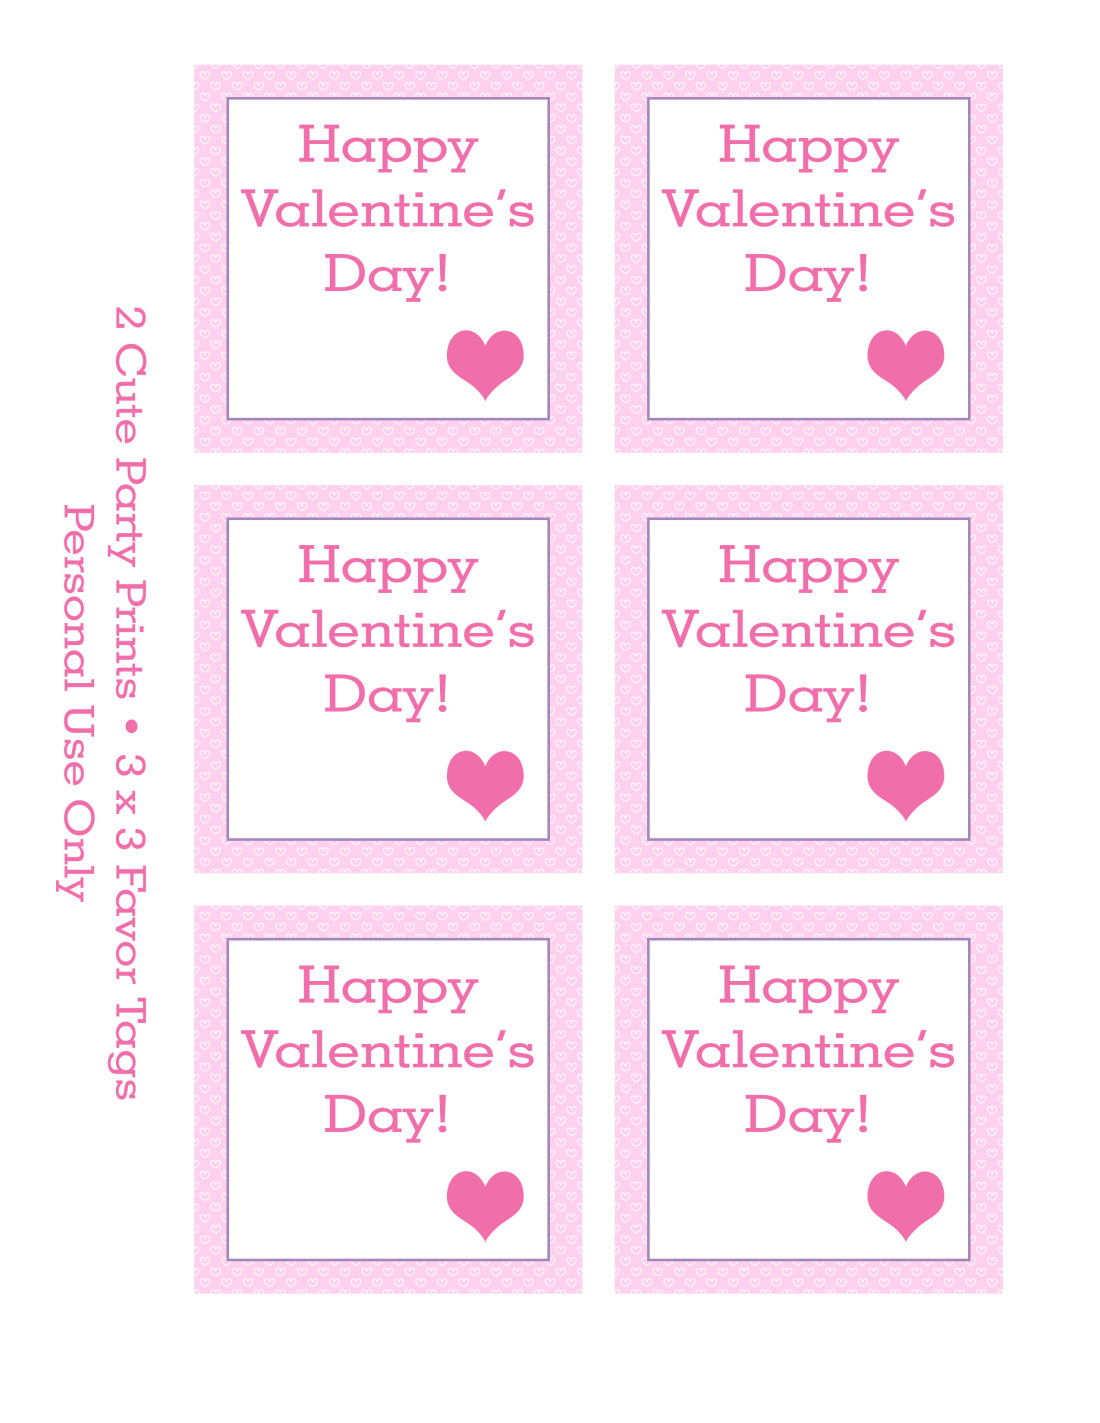 life-s-journey-to-perfection-valentine-s-day-free-printables-and